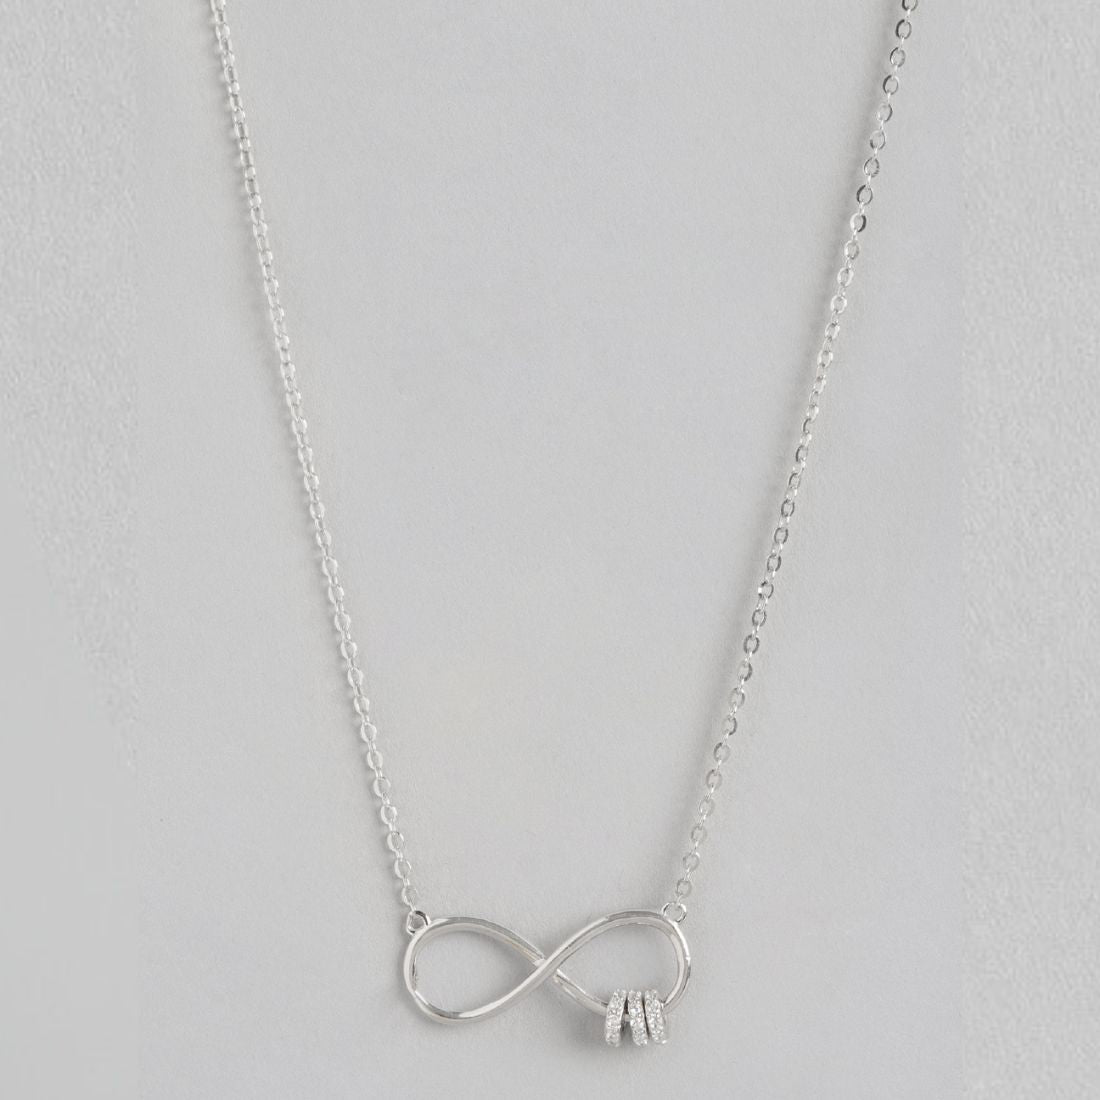 Infinite Sparkle Elegance Rhodium-Plated 925 Sterling Silver Necklace